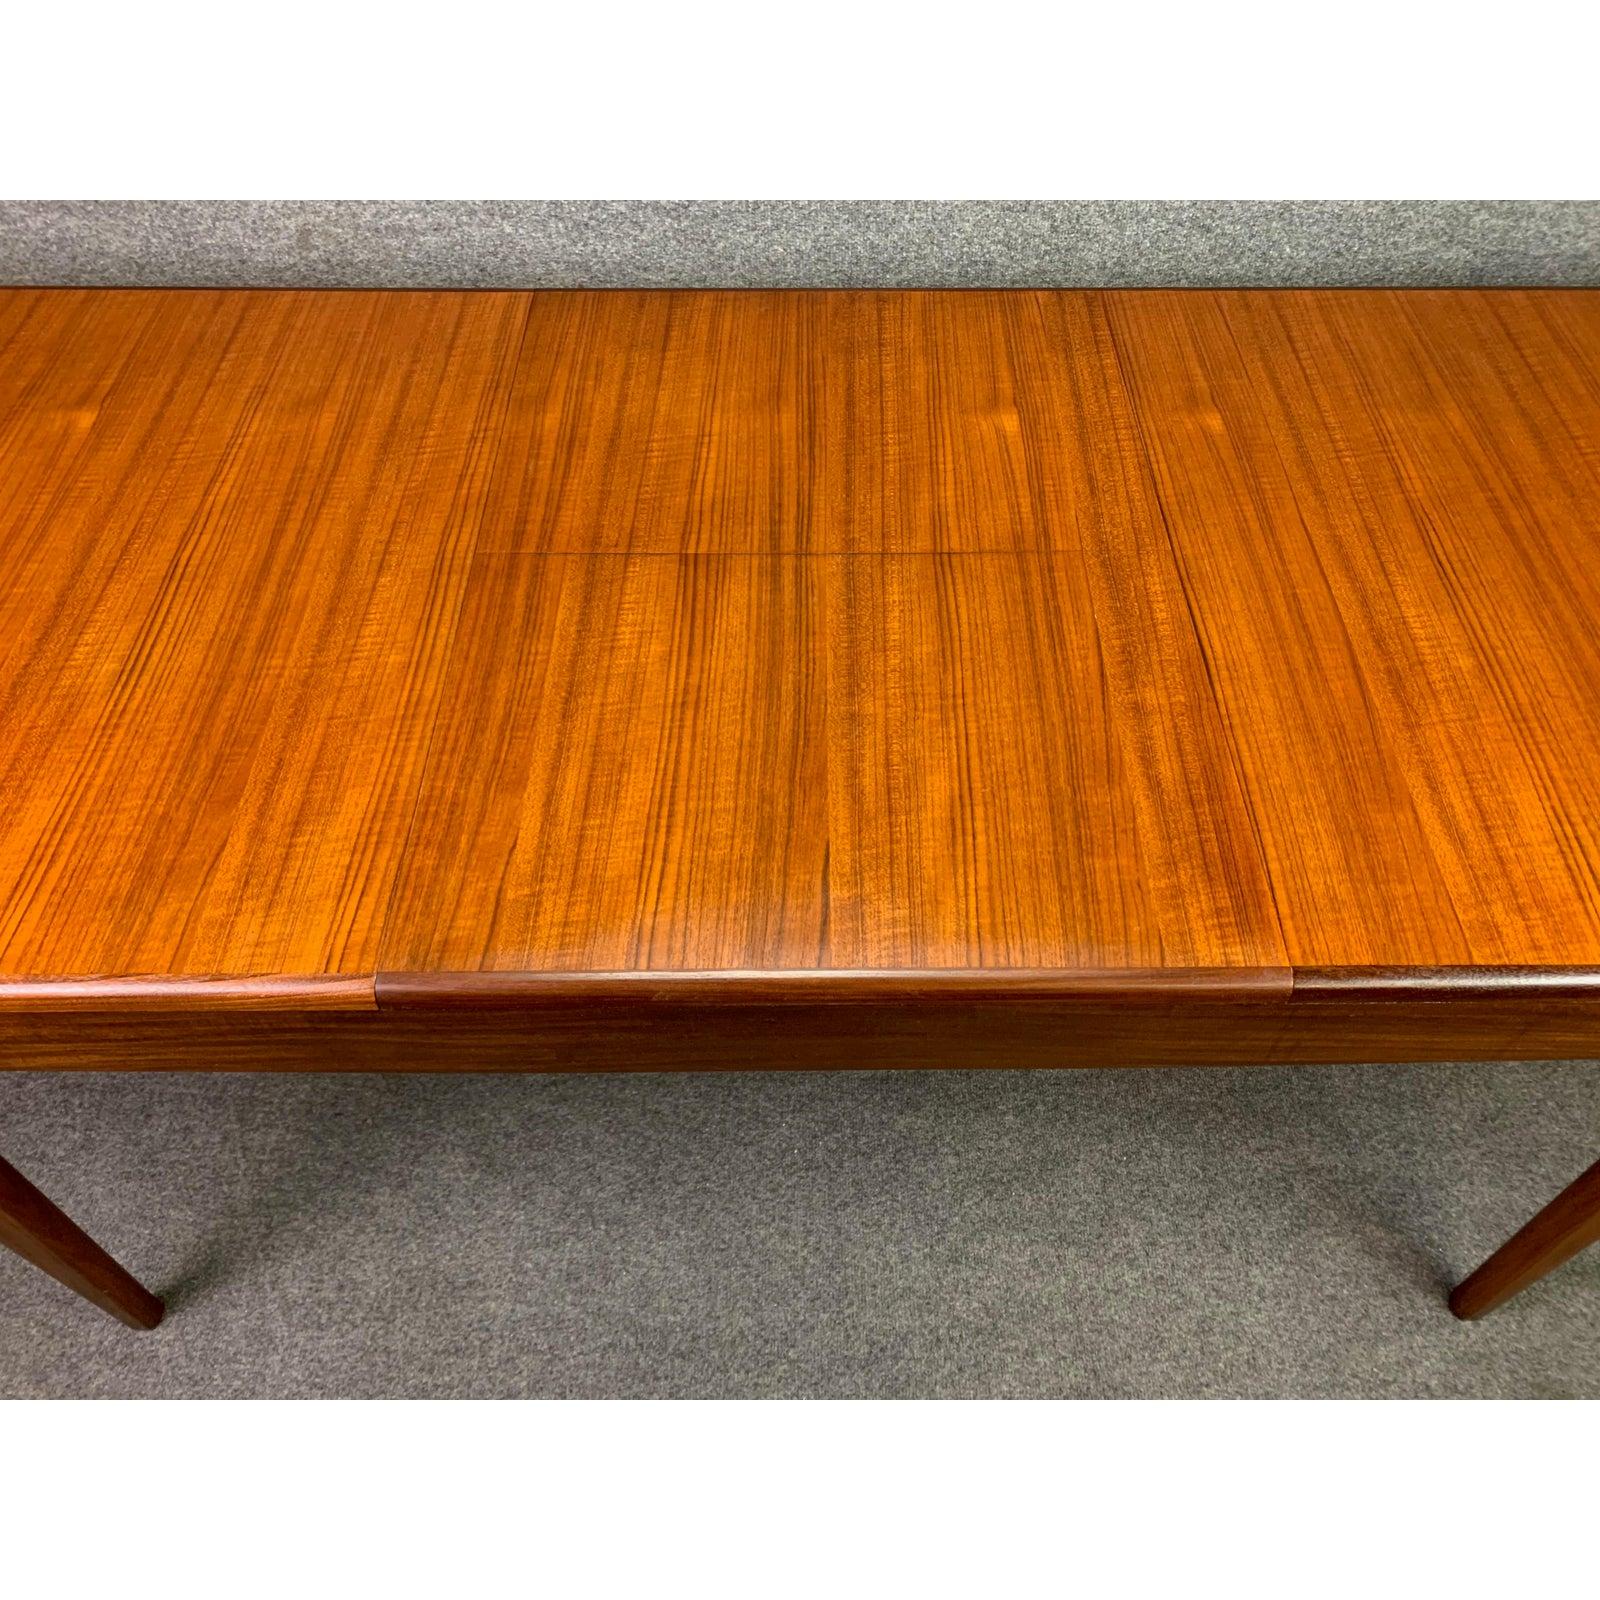 English Vintage British Midcentury Teak Dining Table by John Herbert for A. Younger